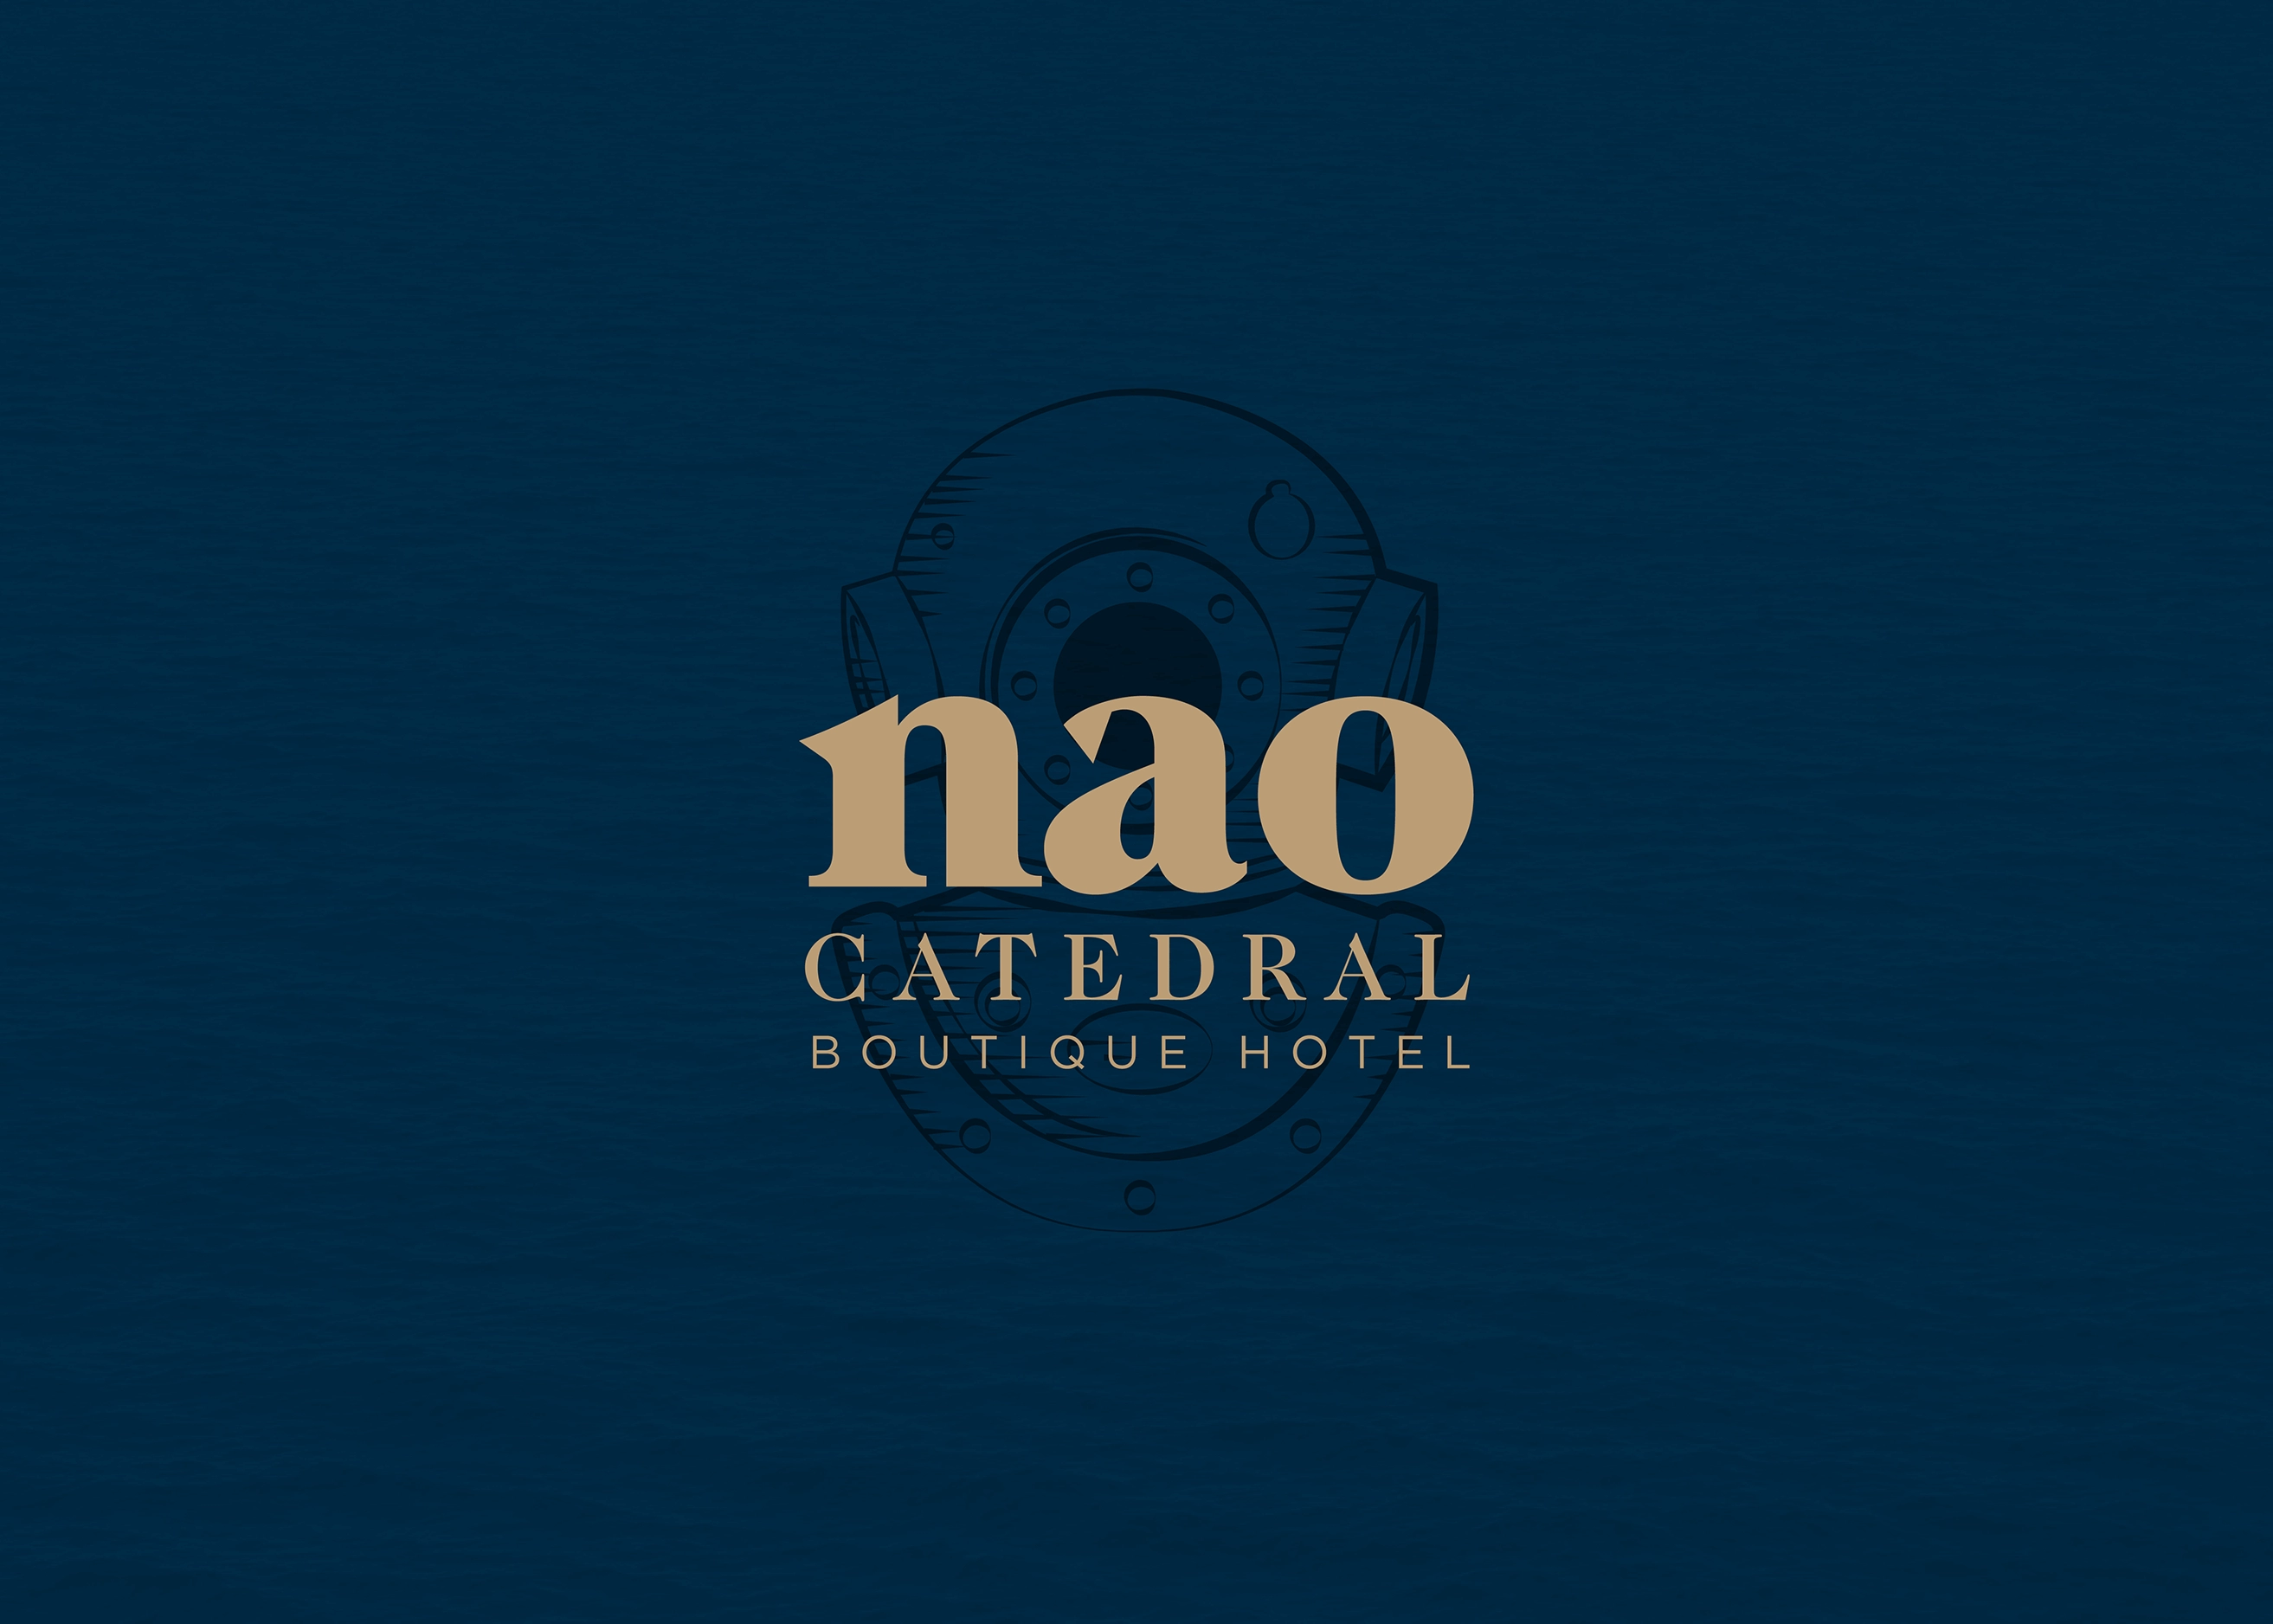 Nao Catedral